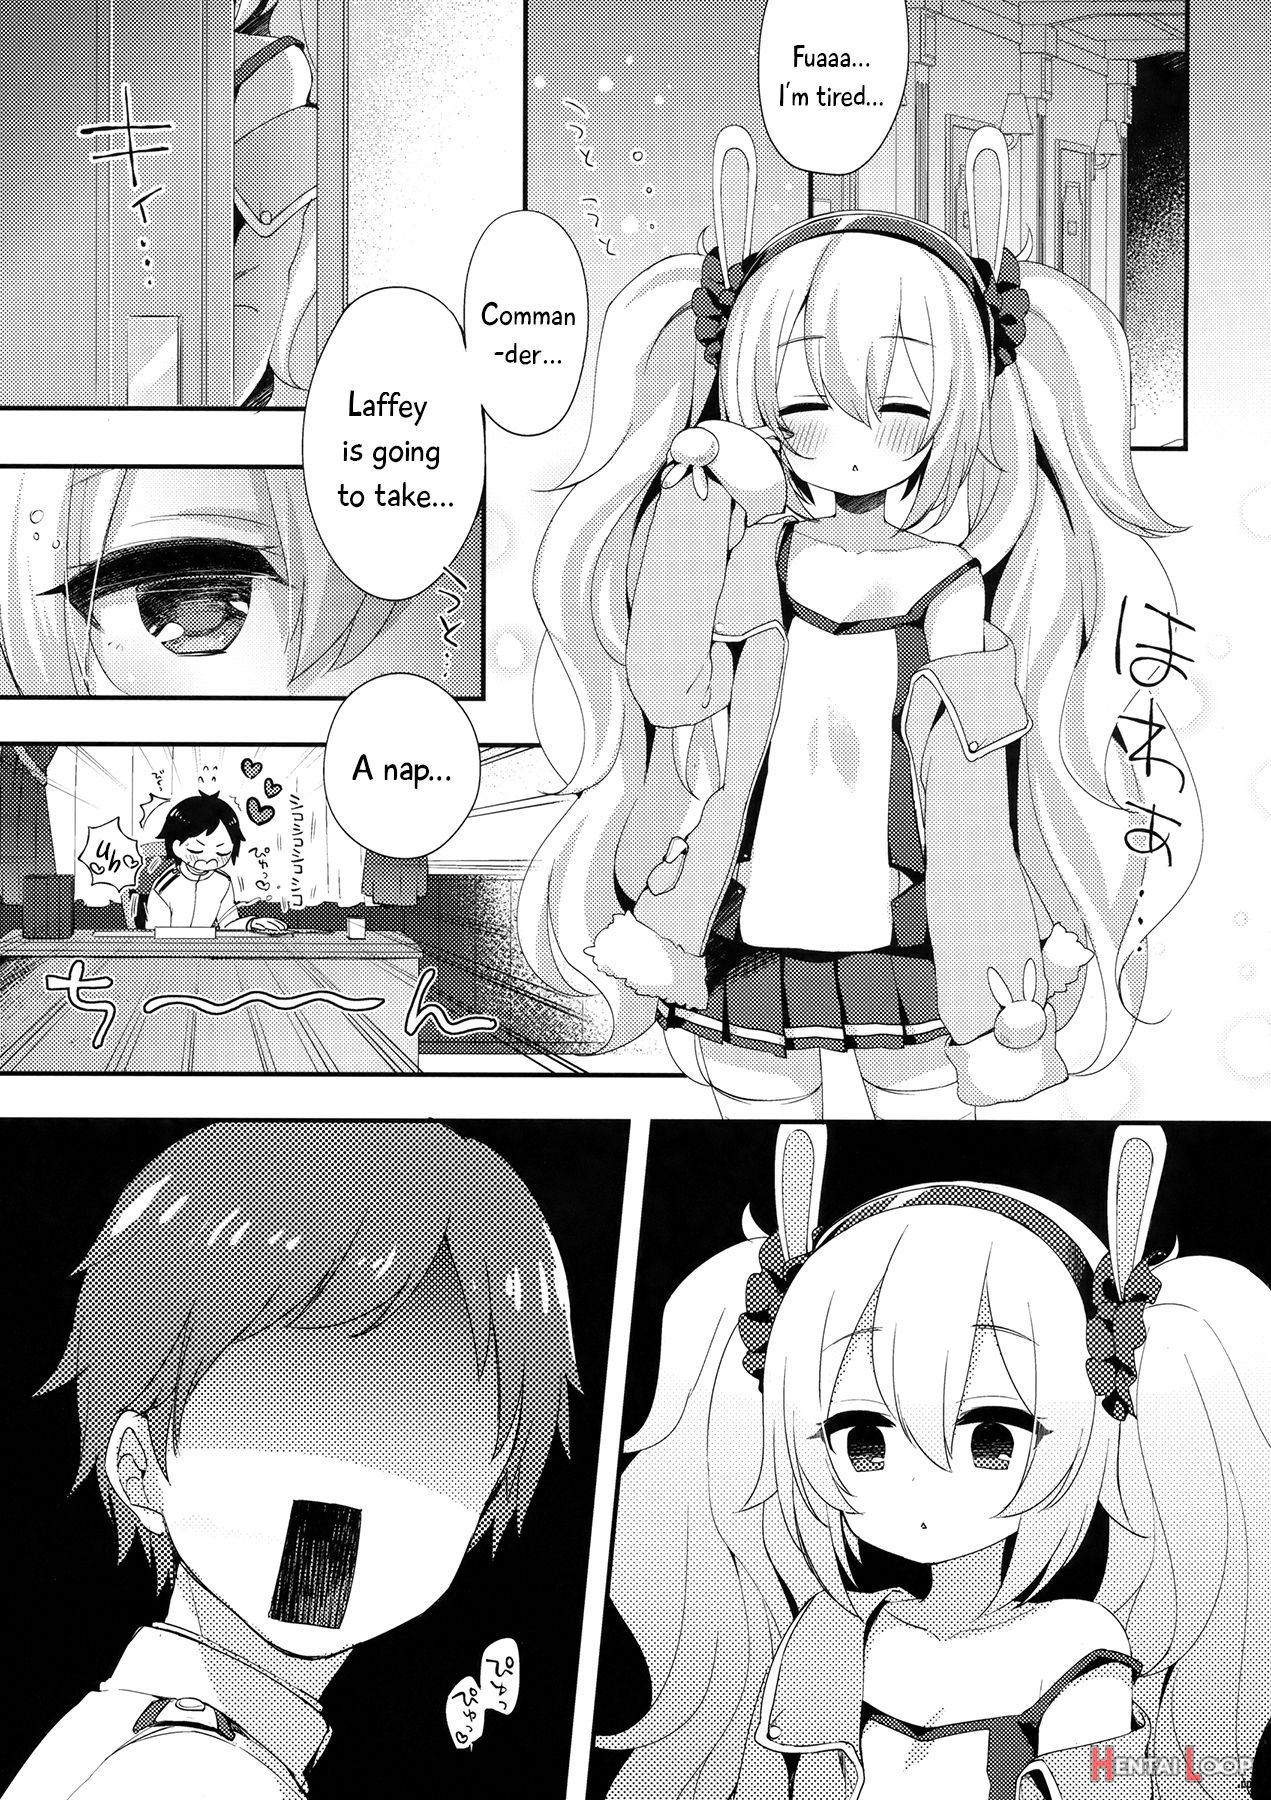 Commander, Will You... With Laffey? page 4